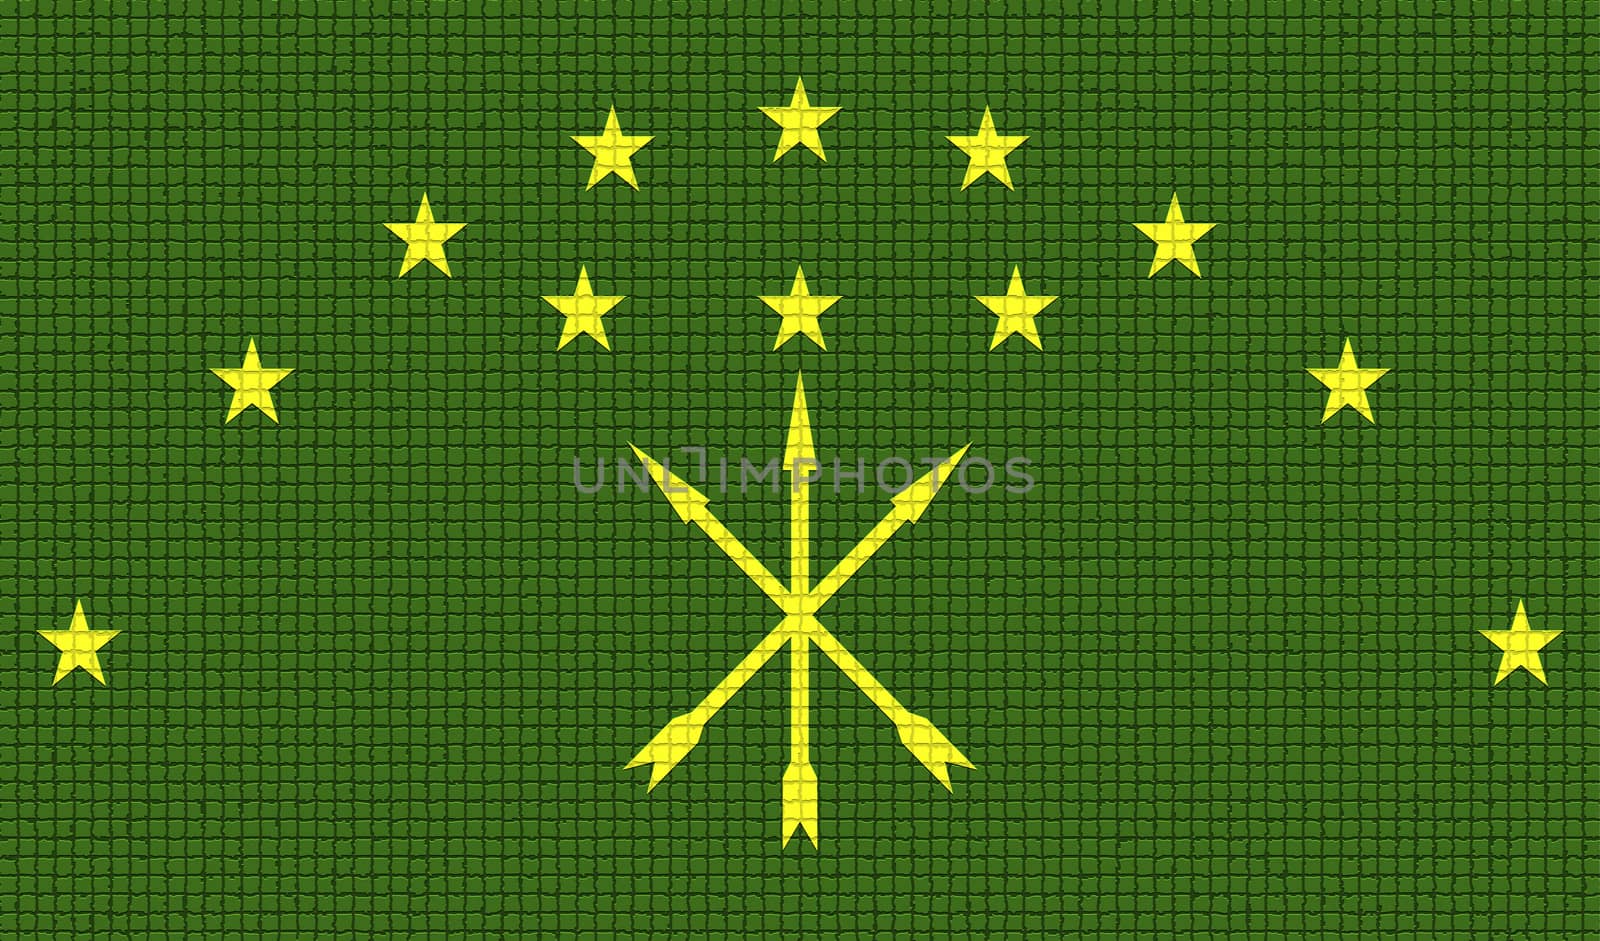 Flags of Adygea with abstract textures. Rasterized version